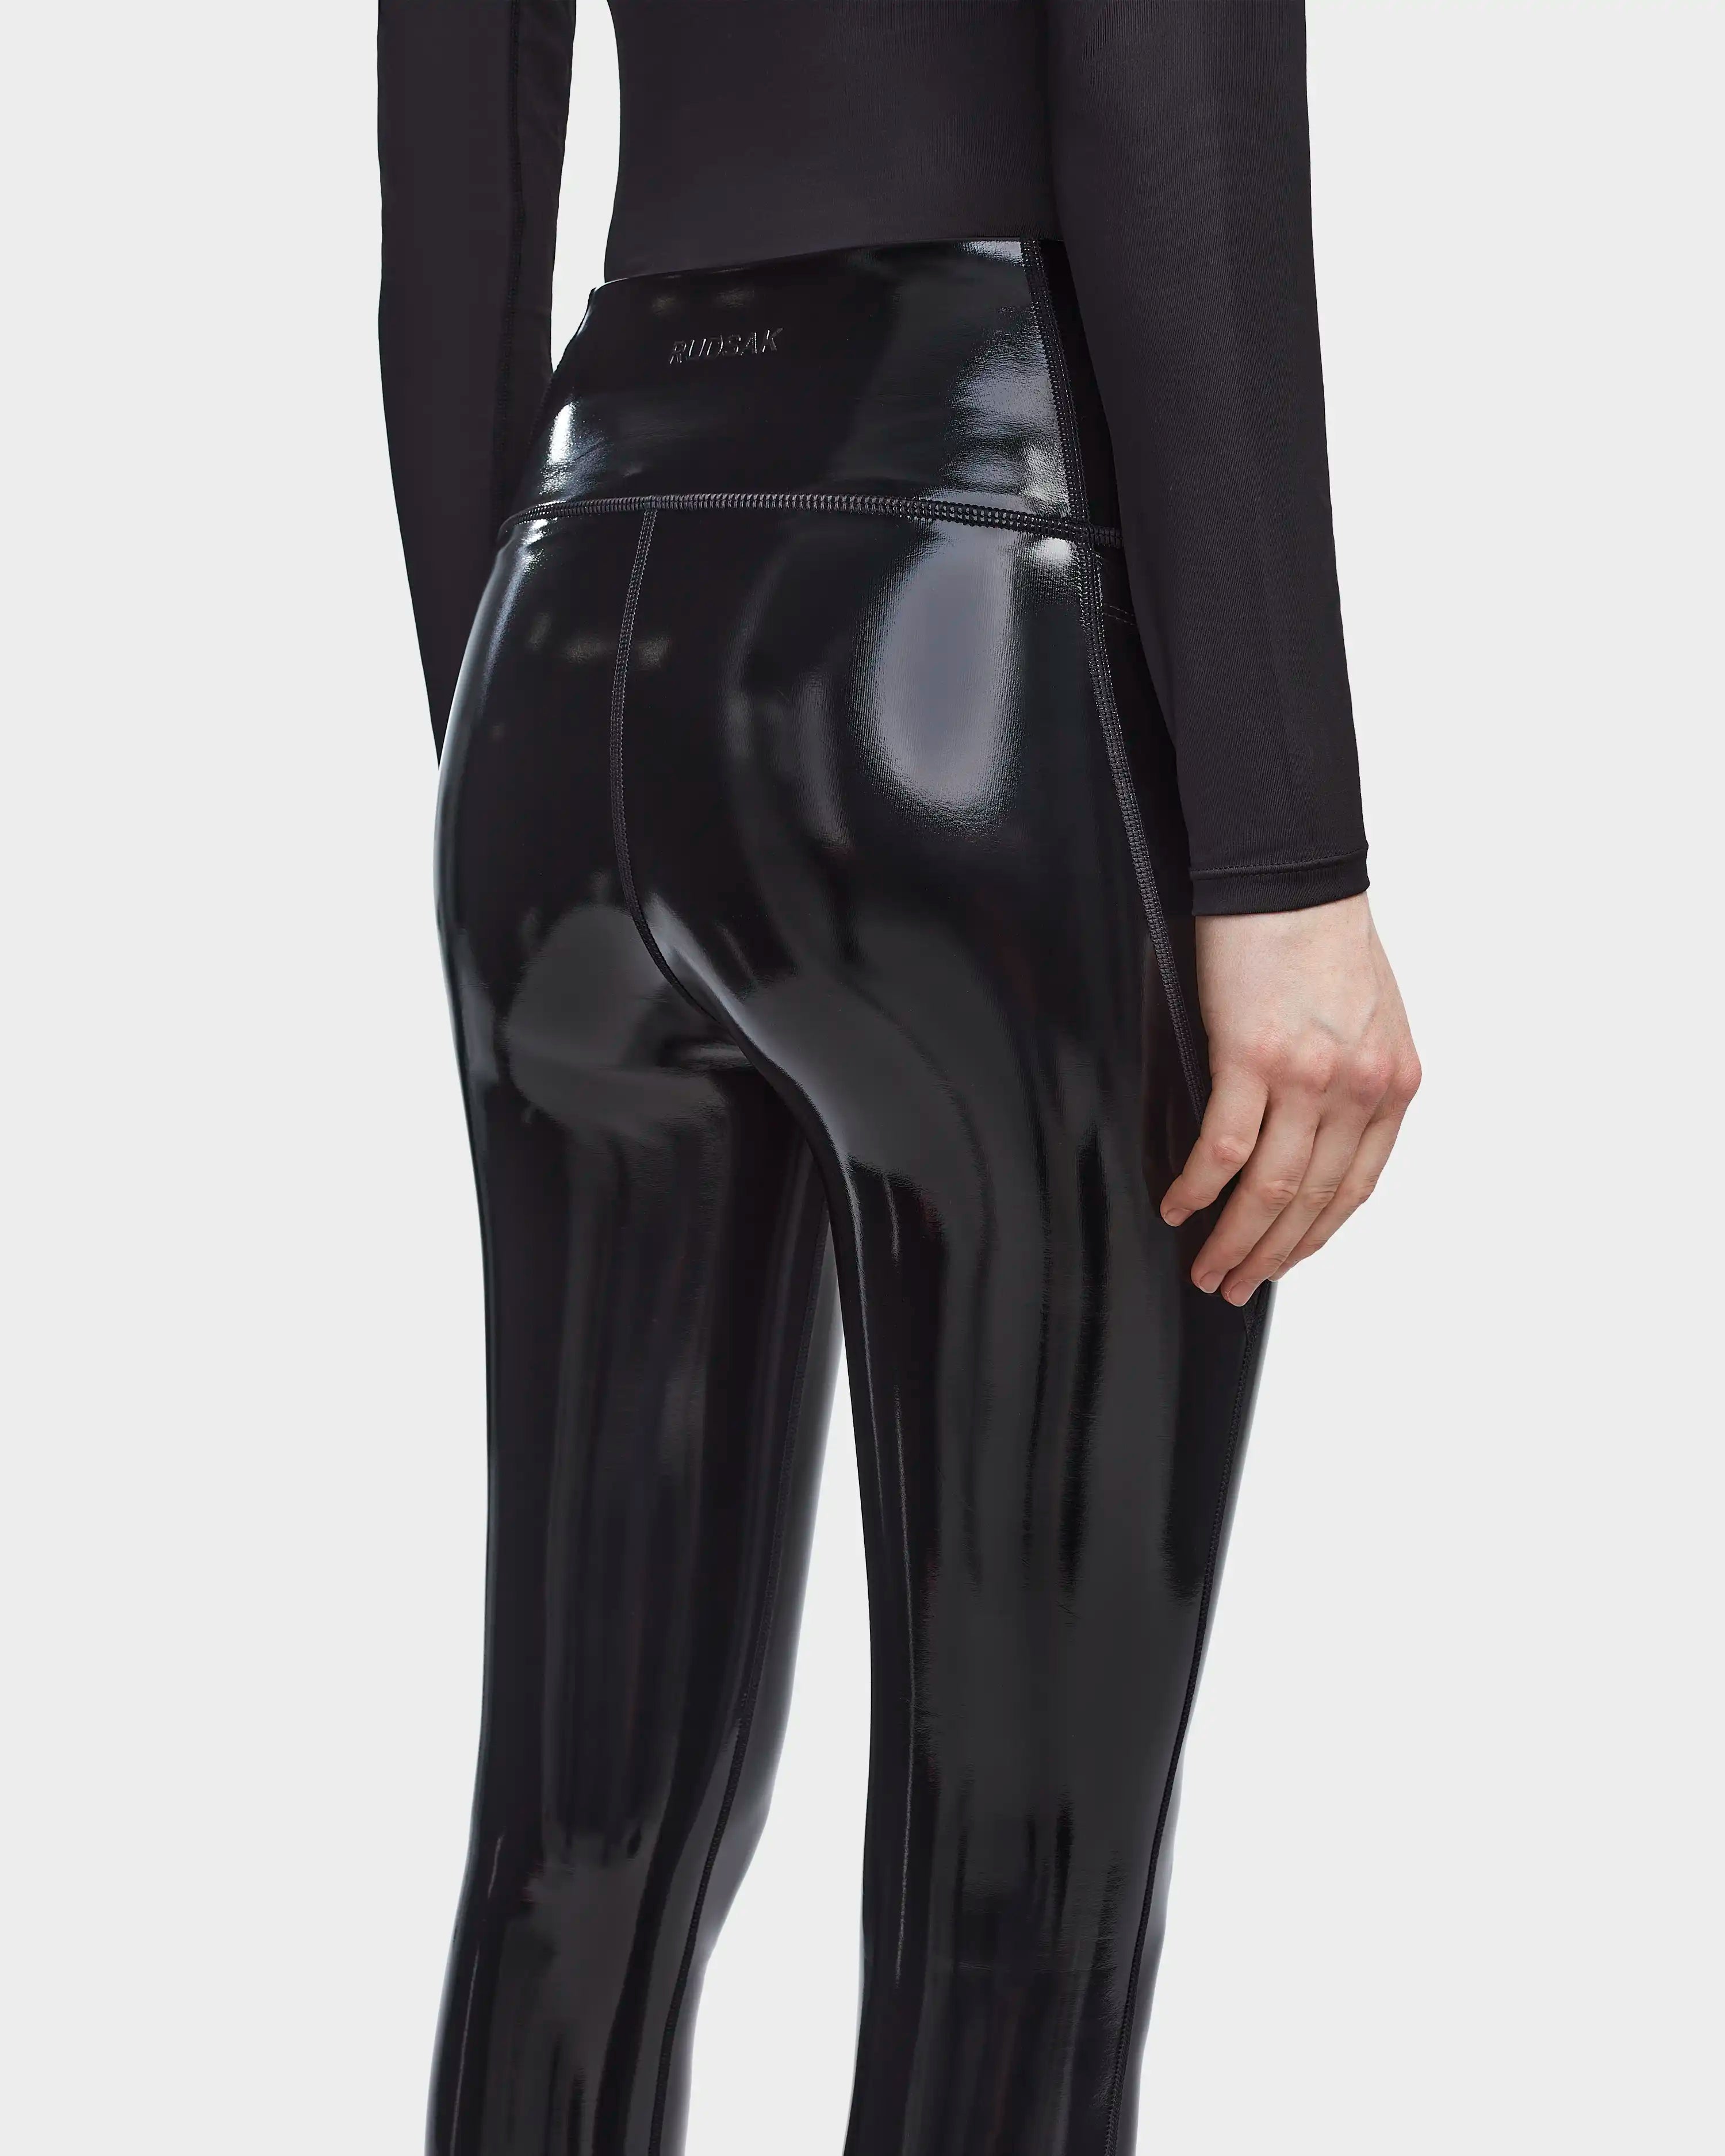 How To Style Shiny Liquid Faux Leather Leggings / Pants